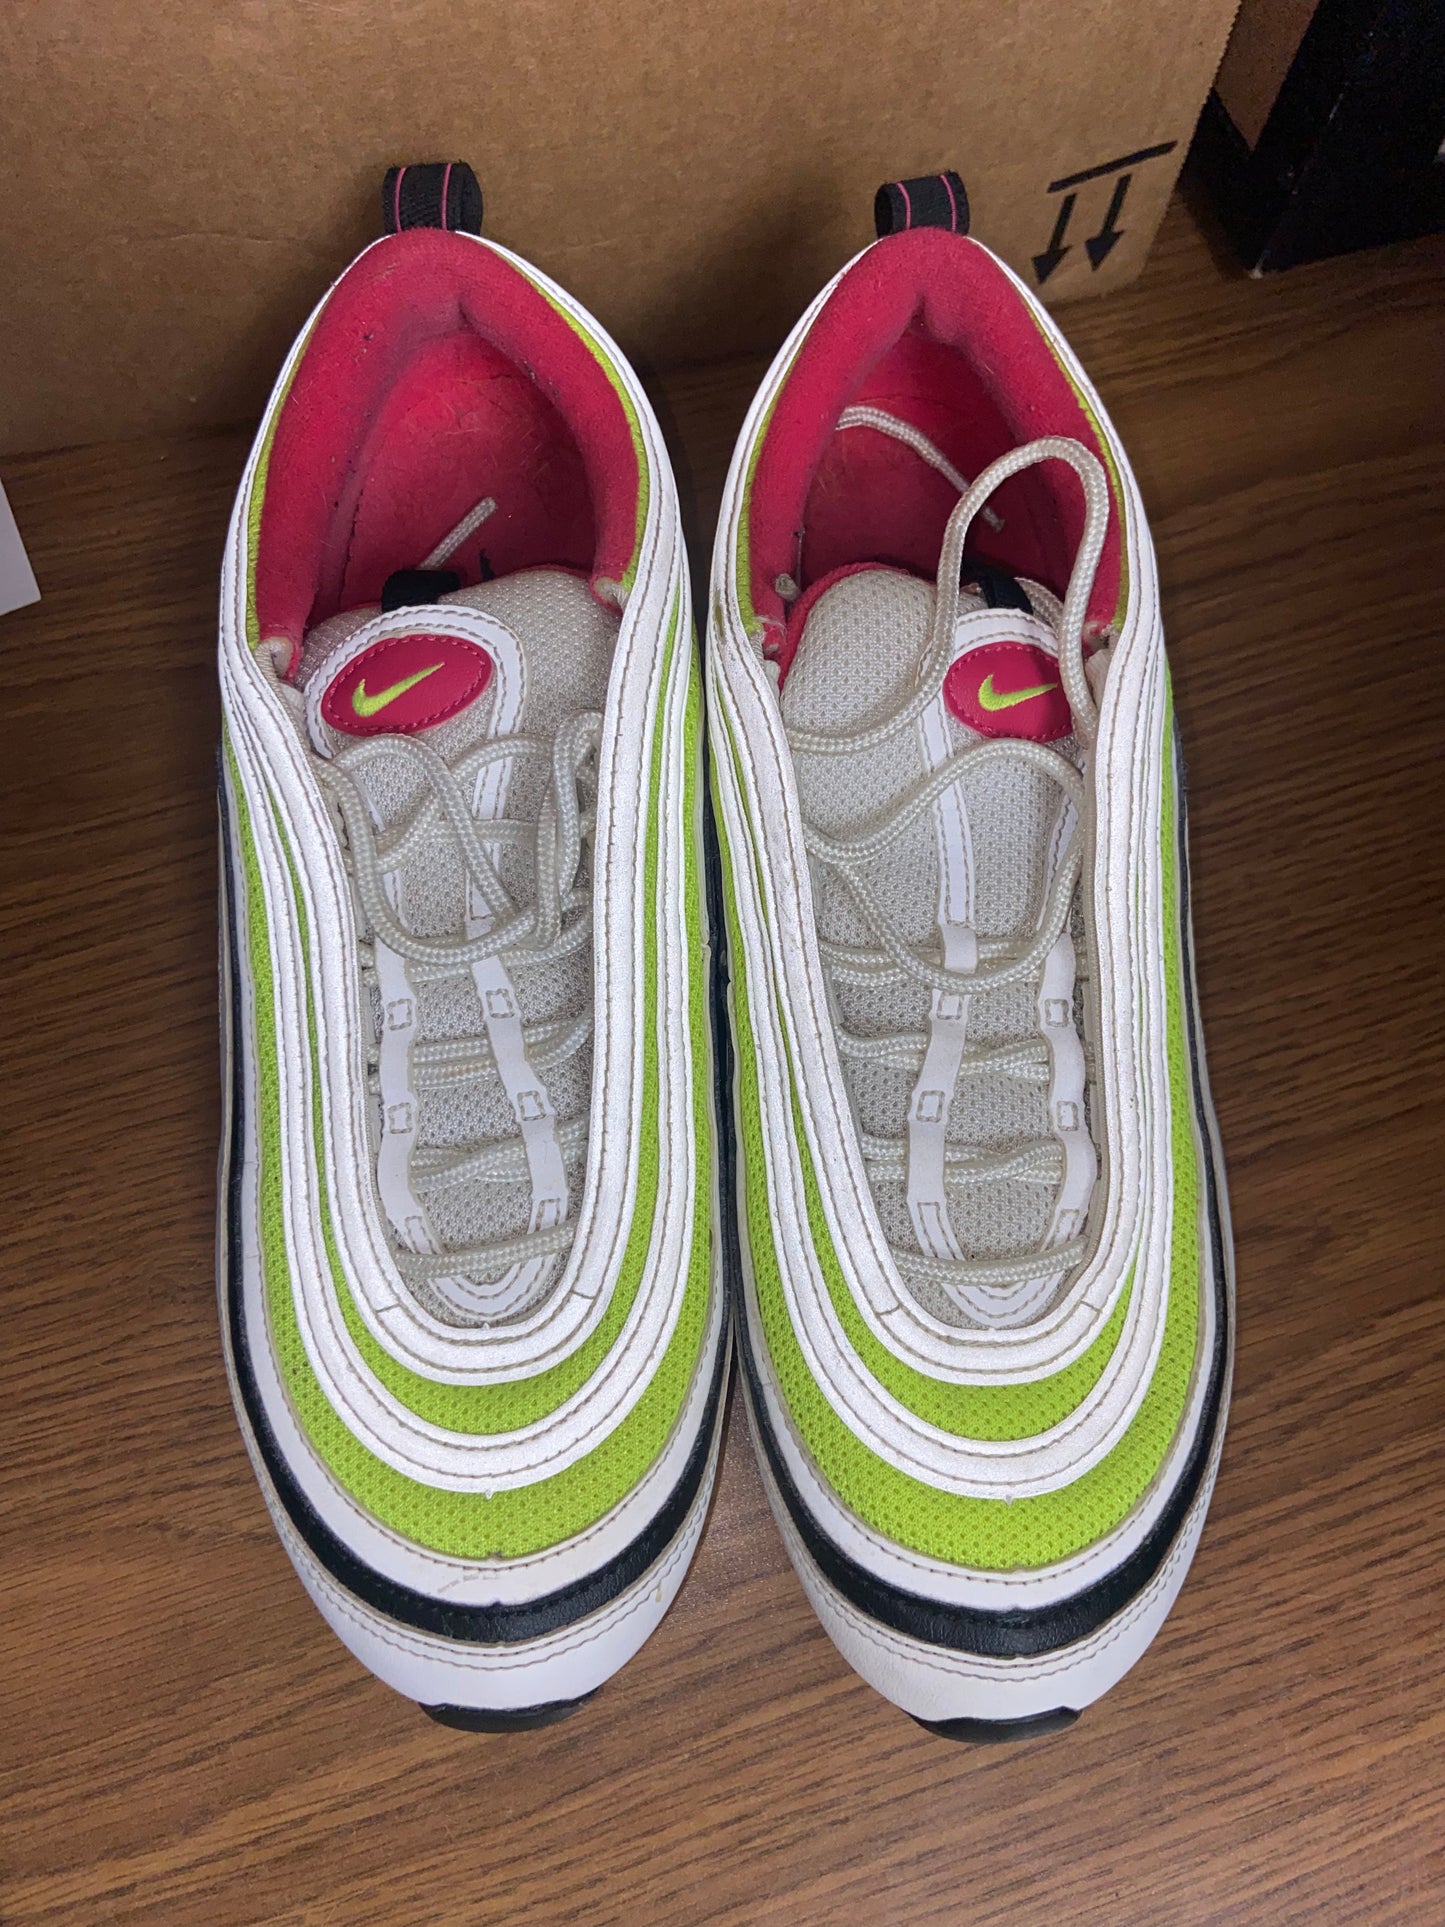 Nike Air Max 97 Volt Pink Sneakers (Size 8)